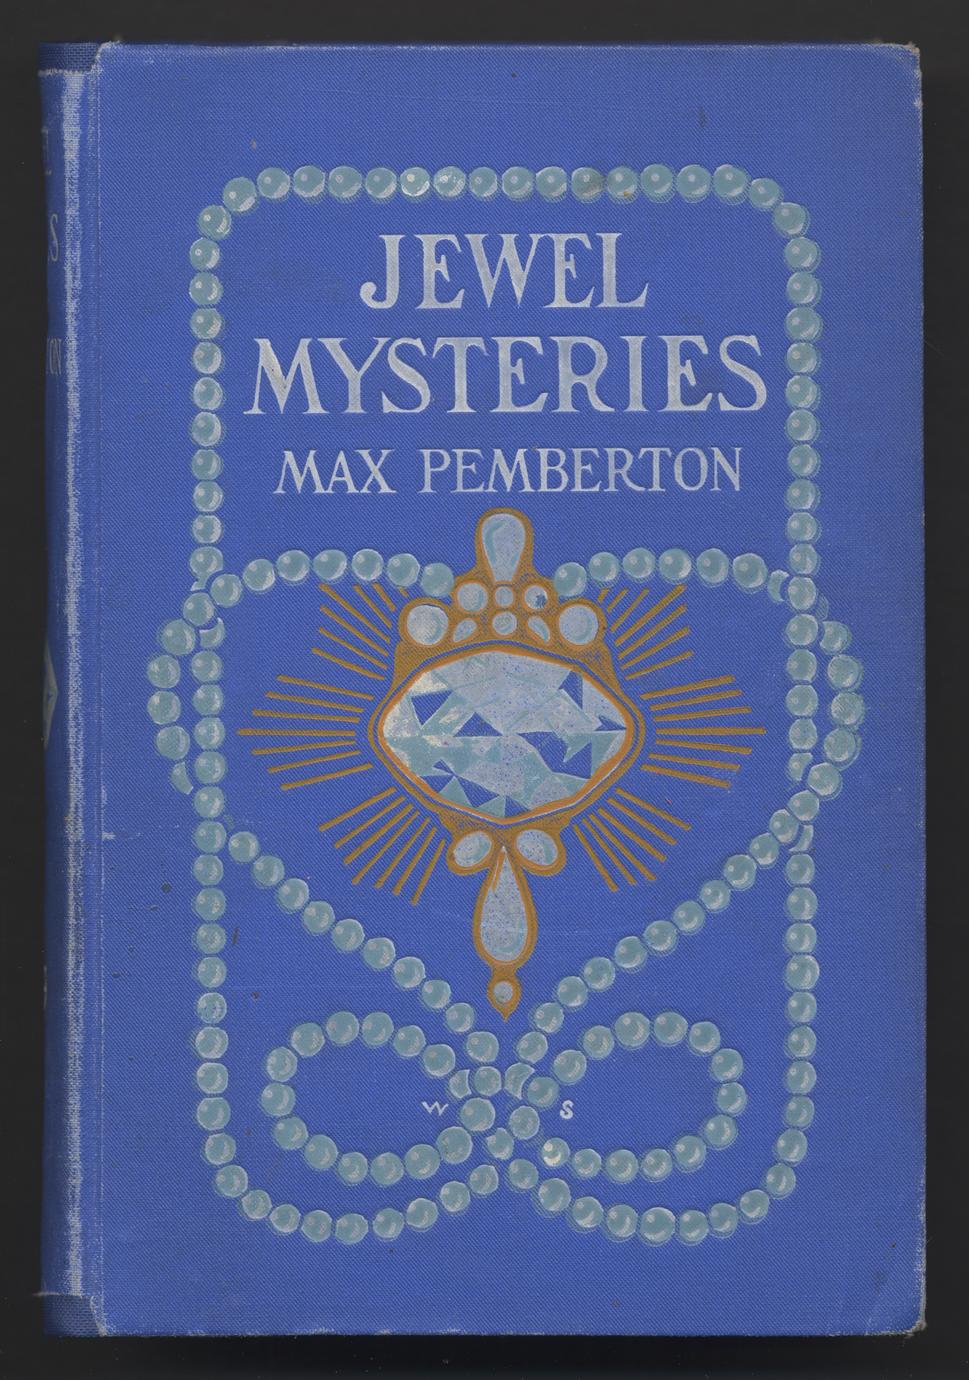 Jewel mysteries from a dealer's note book (1 of 3)